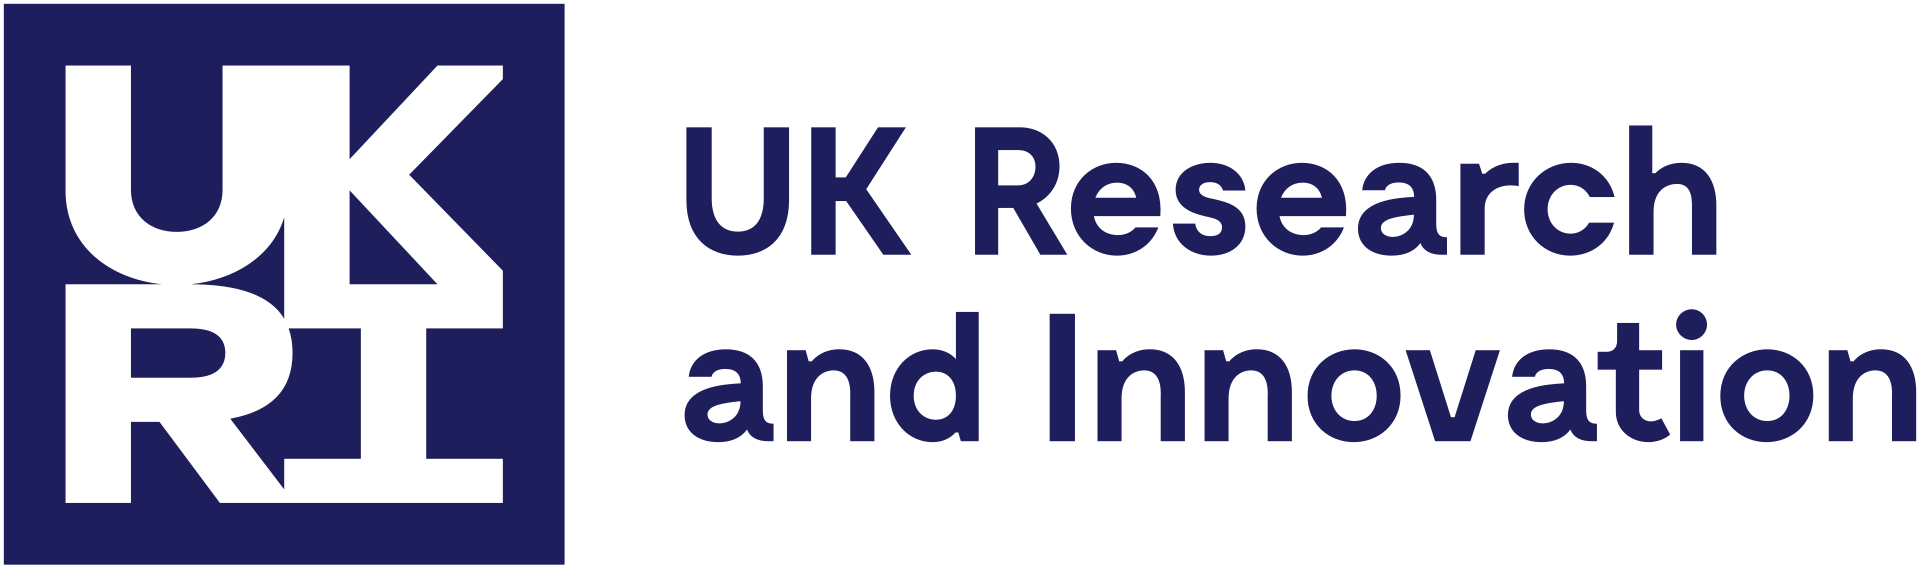 UK Research and Innovation, UKRI - Biotechnology and Biological Sciences Research Council, BBSRC